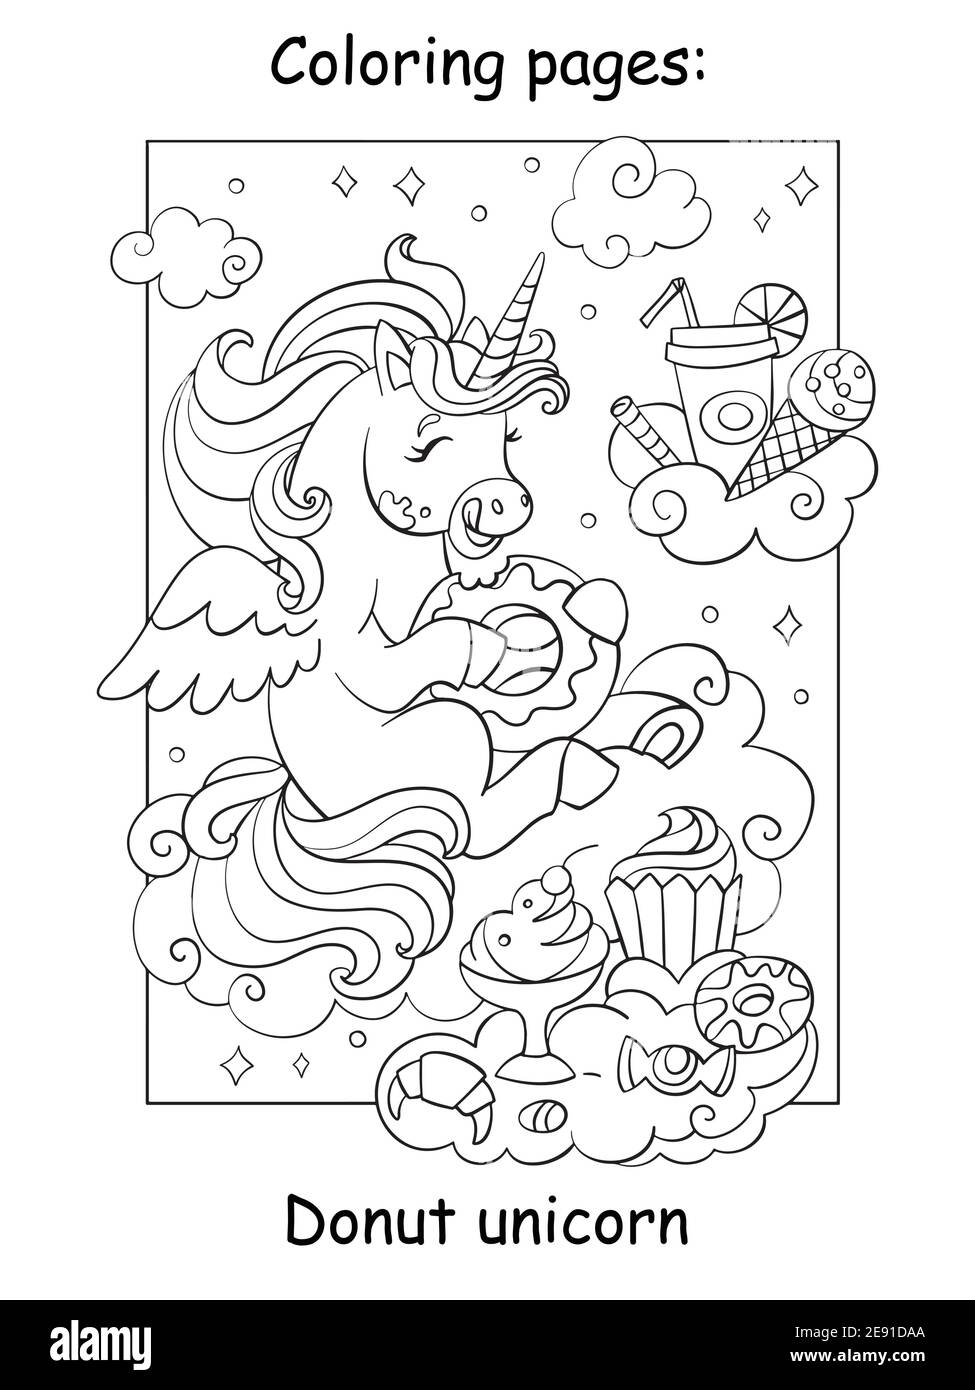 Cute unicorn eats donuts and other sweets. Coloring book page for ...